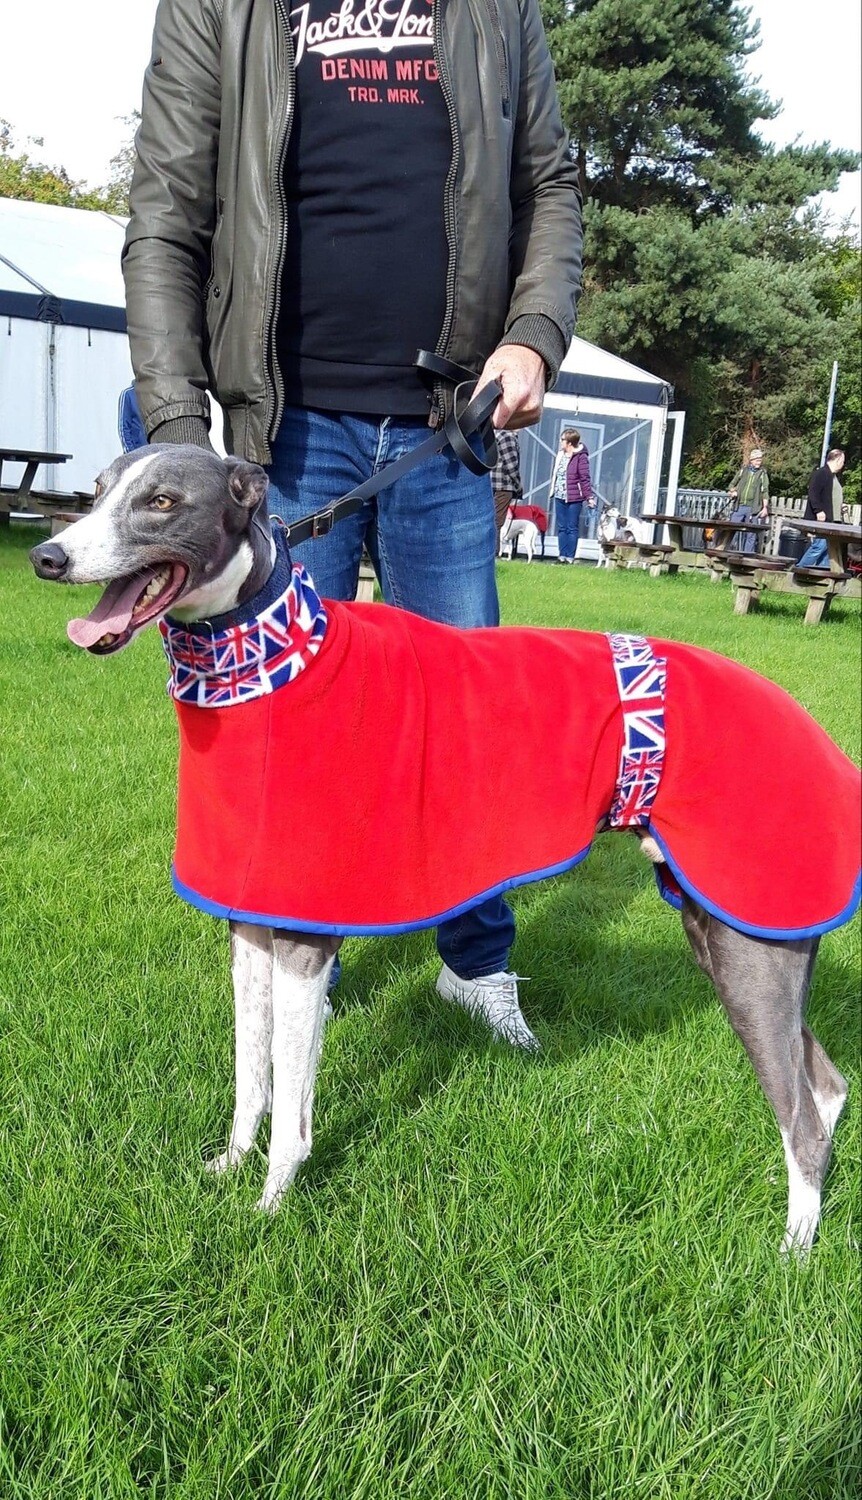 ALL SIZES!! -  Red Fleece with Union Jack Red White & Blue Fleece Trim - Large Whippet, Lurcher and Greyhound PJ's - Pre Order